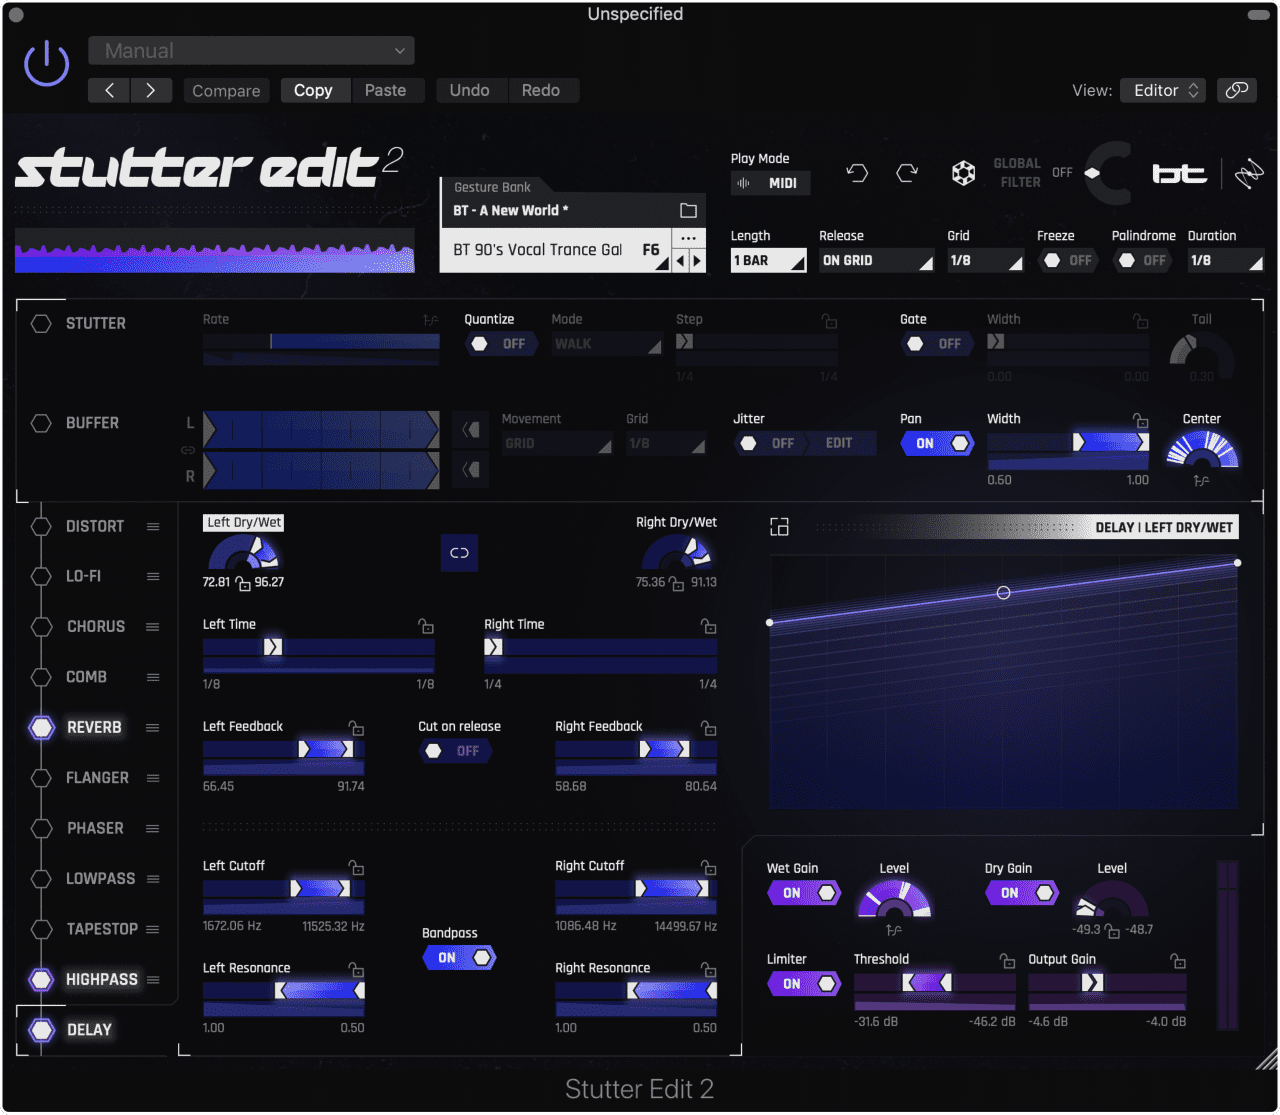 Izotope’s Stutter Edit 2 – Inspired by BT